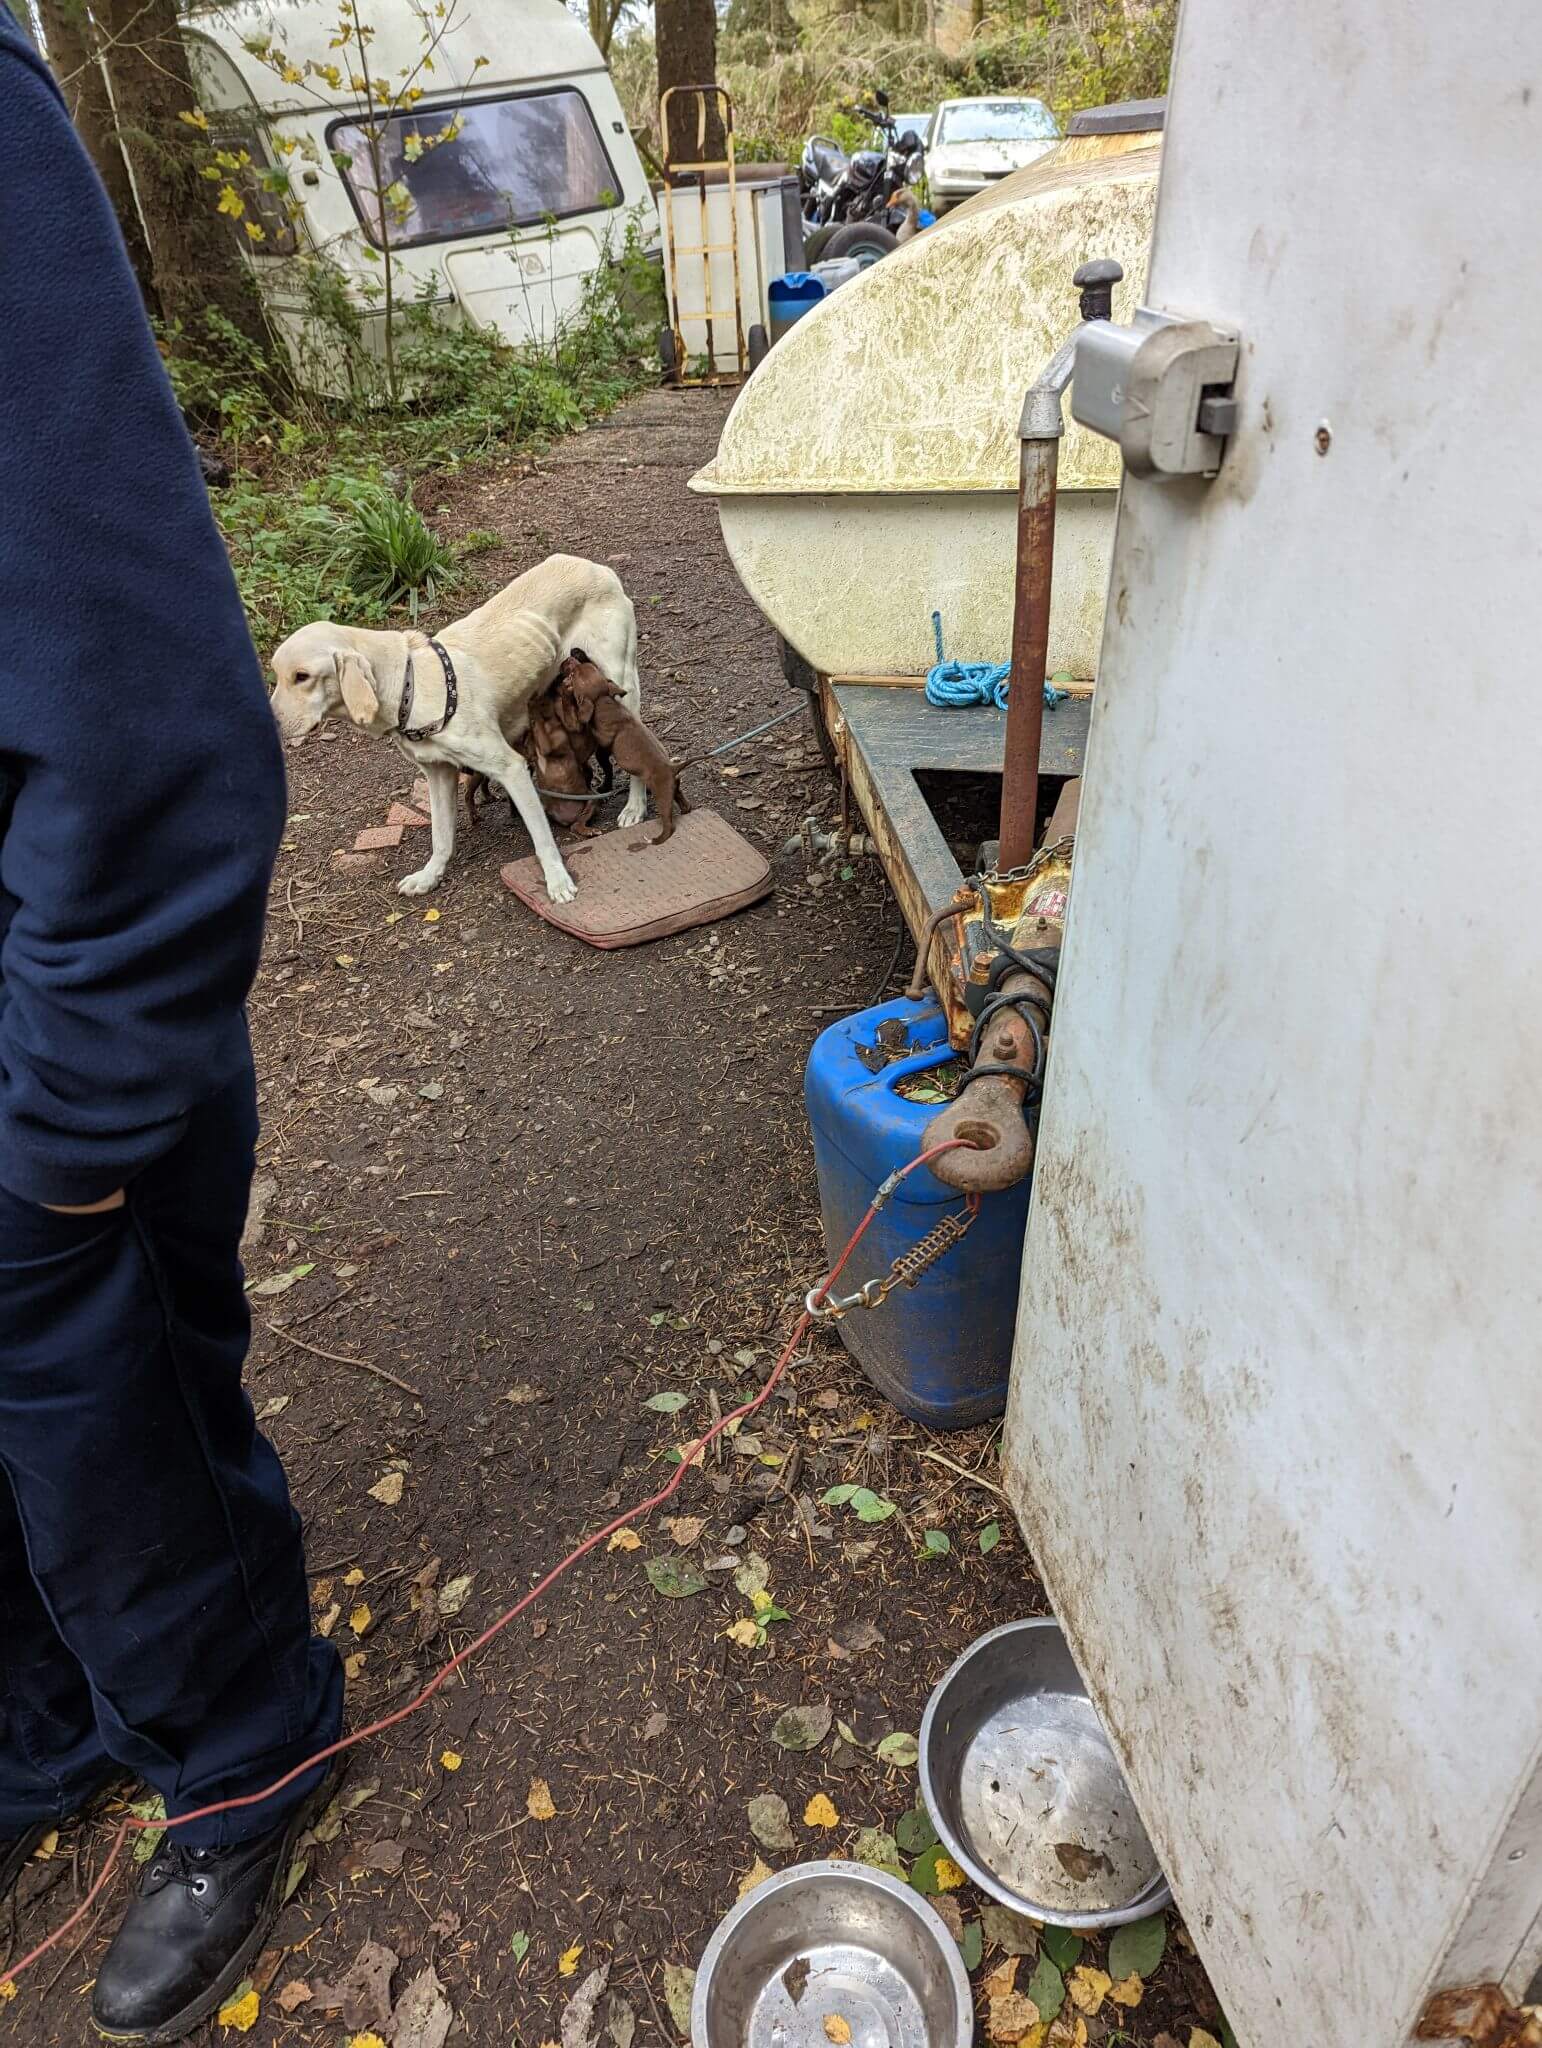 two photos of dogs in poor conditions